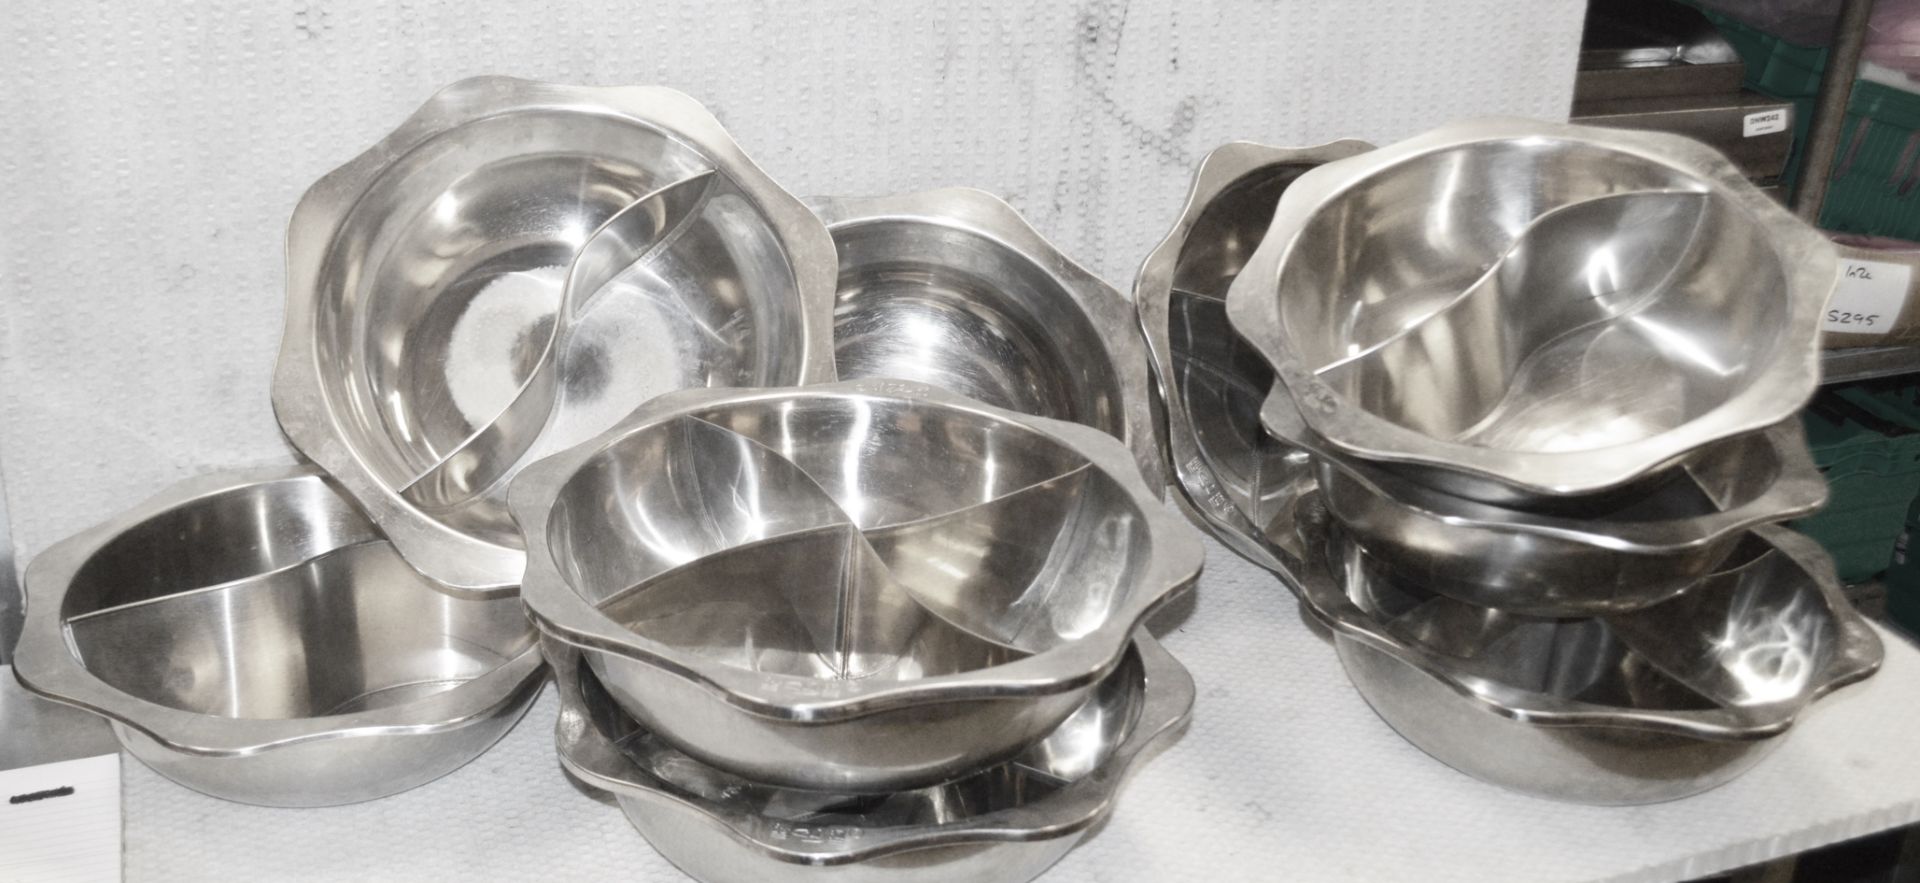 8 x Stainless Steel Buffet Serving Bowls- Dimensions: L37 x W37 x cm - Recently Removed From a - Image 4 of 4